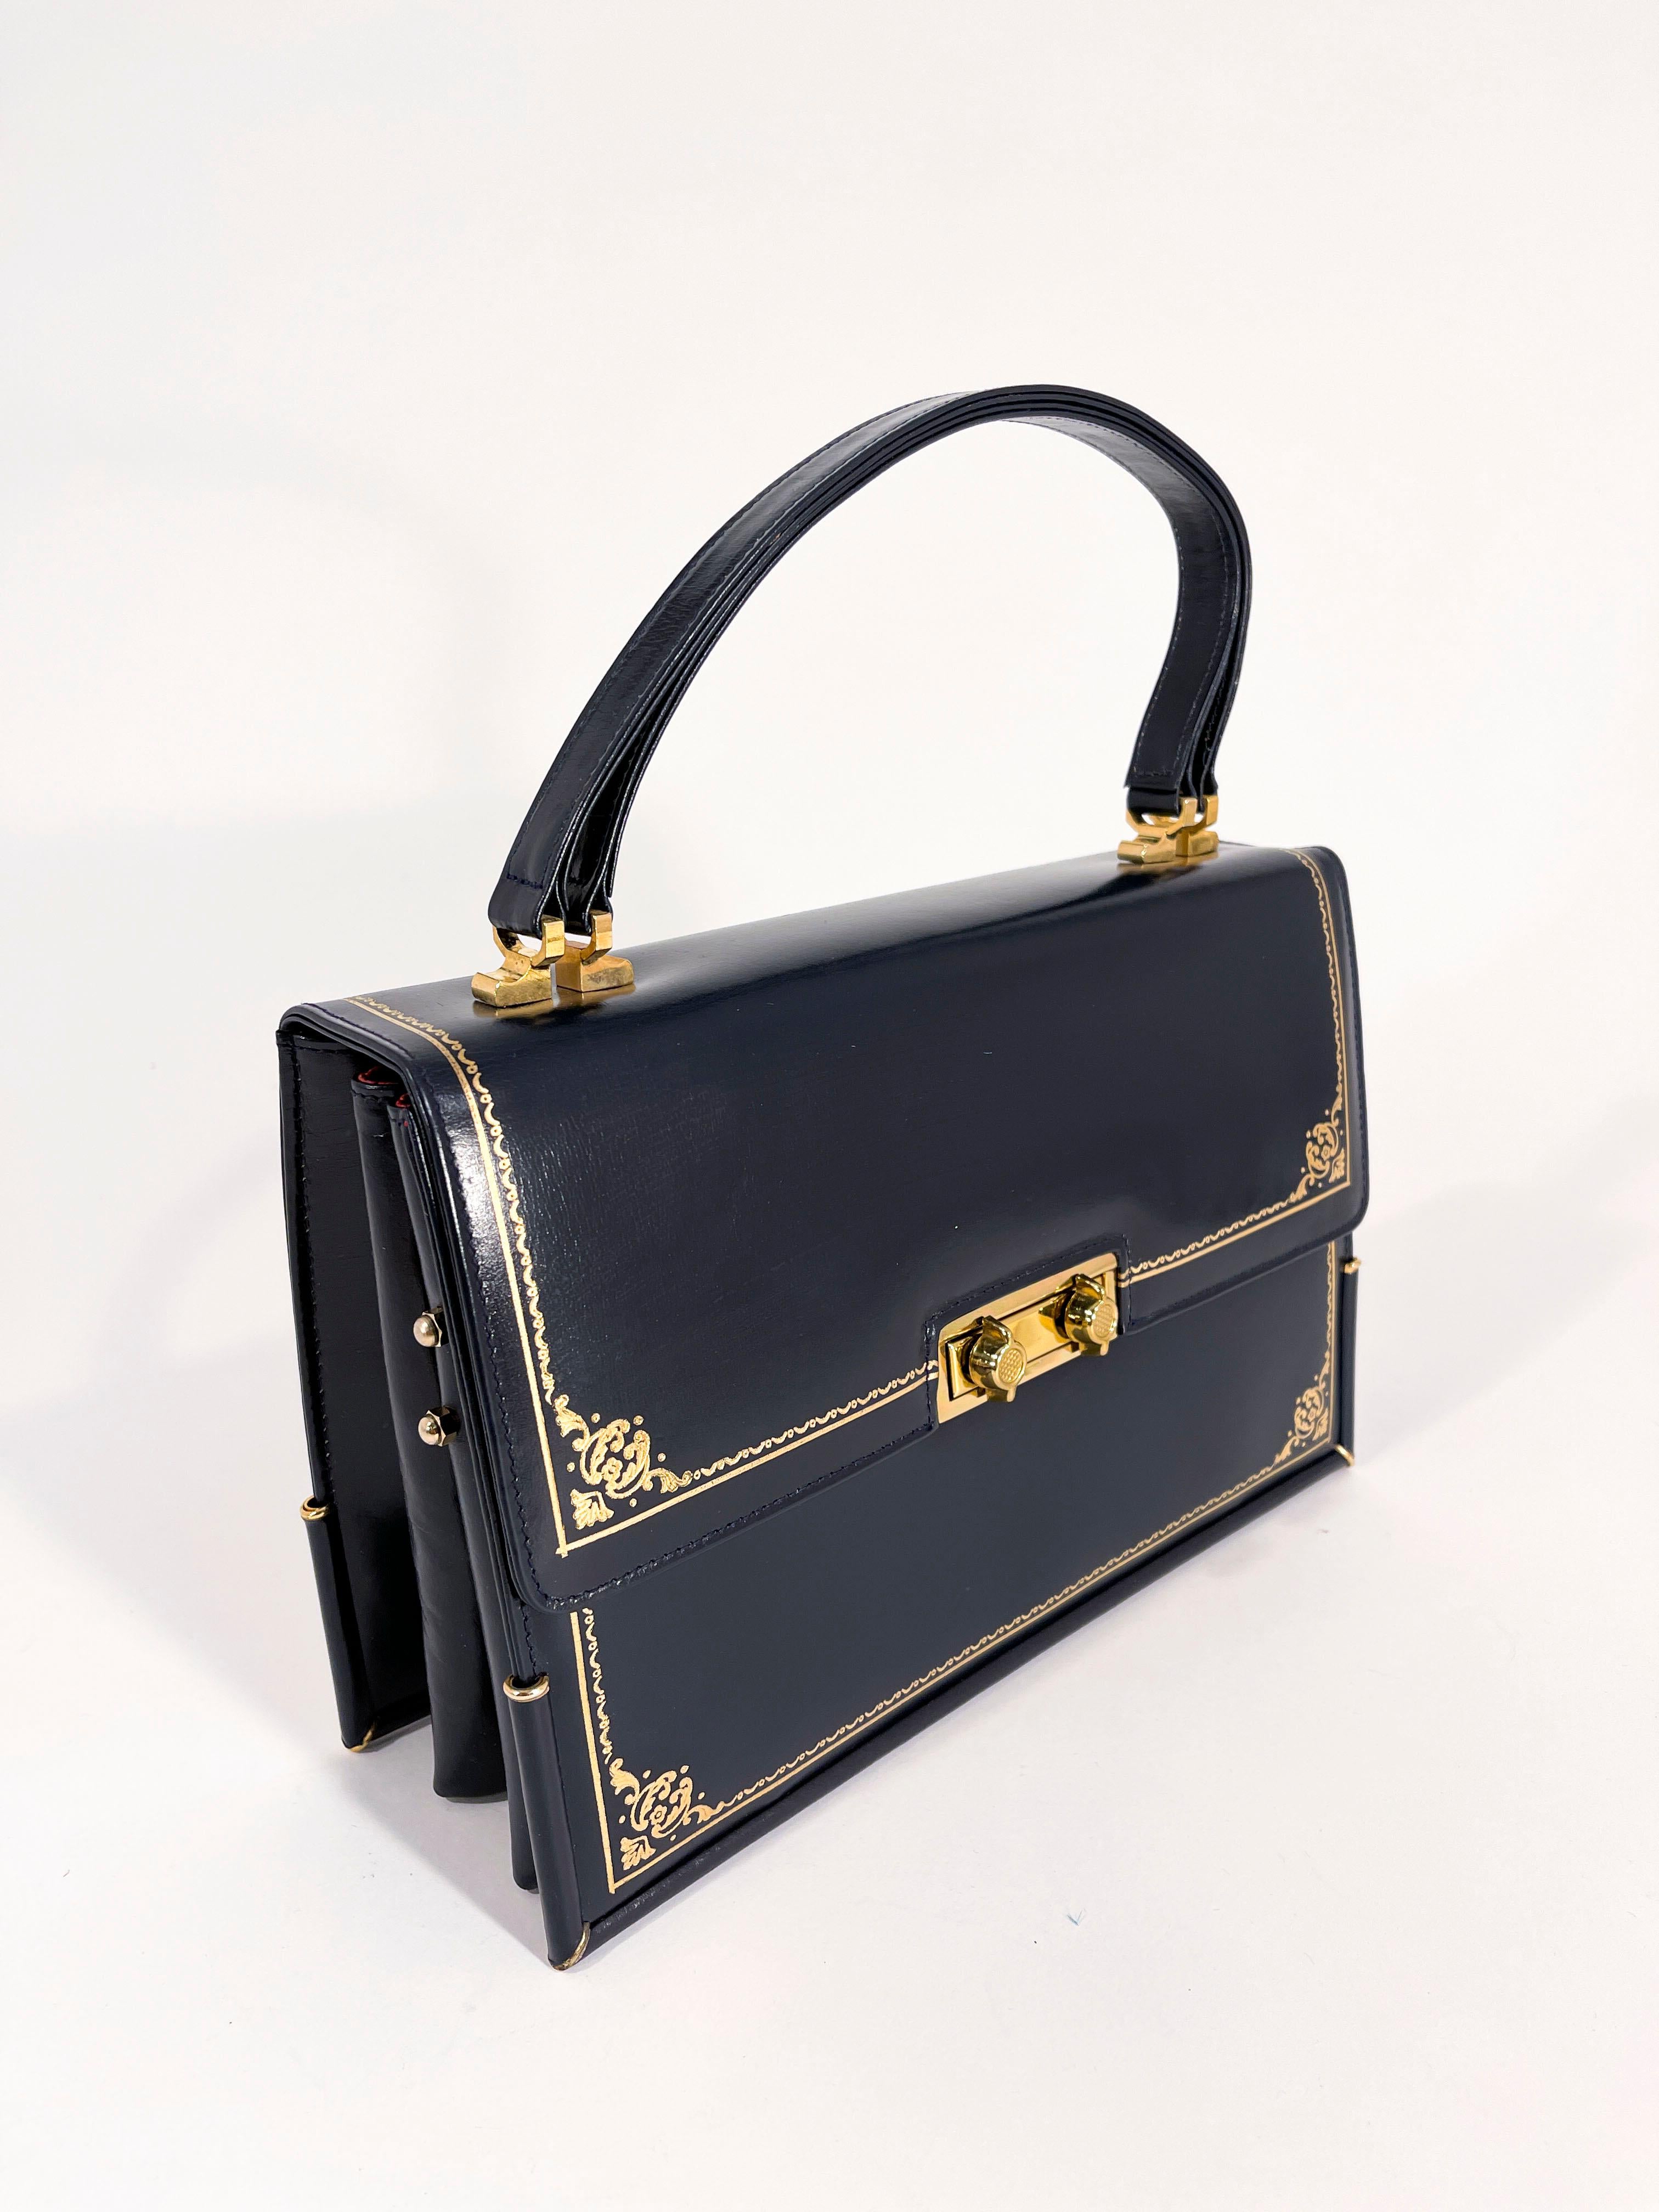 1950s Navy blue top-handle handbag featuring a book motif and shape. The front and back has gold embossing to mimic antique bound books. The entire purse has brass hardware including a double lock closure and reenforced brass edges to protect the